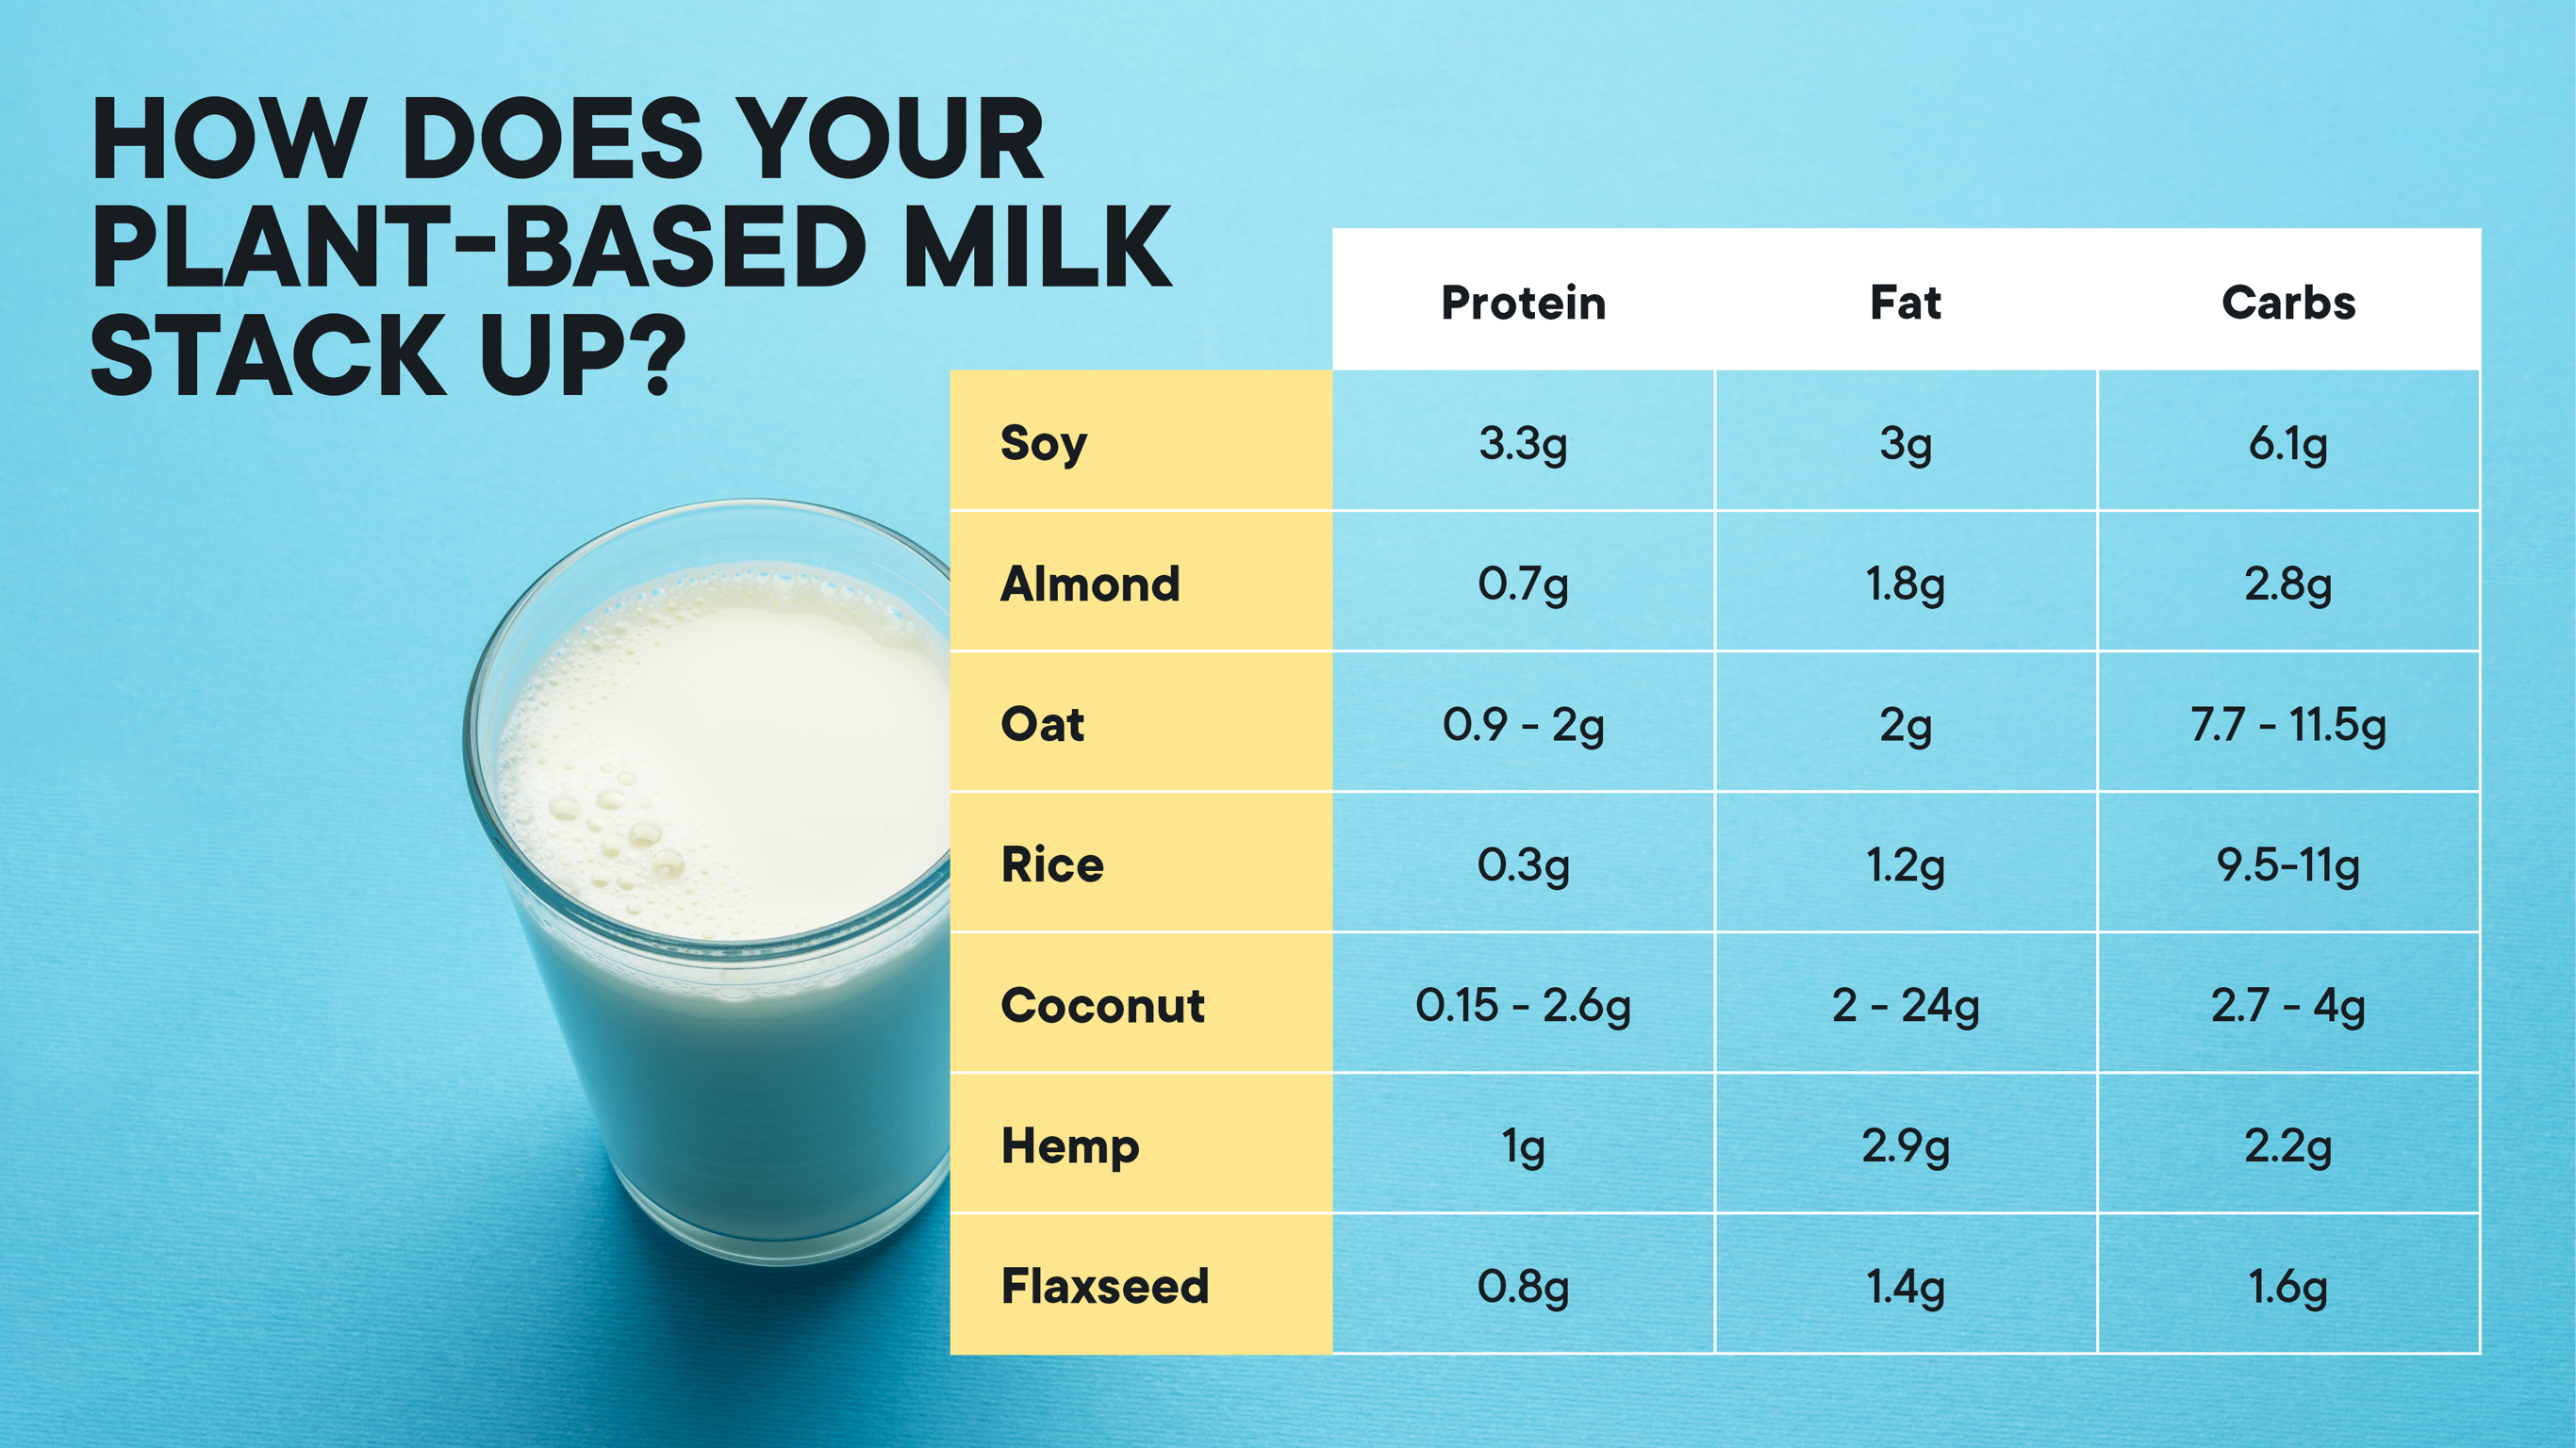 How Much Protein Is In Milk?